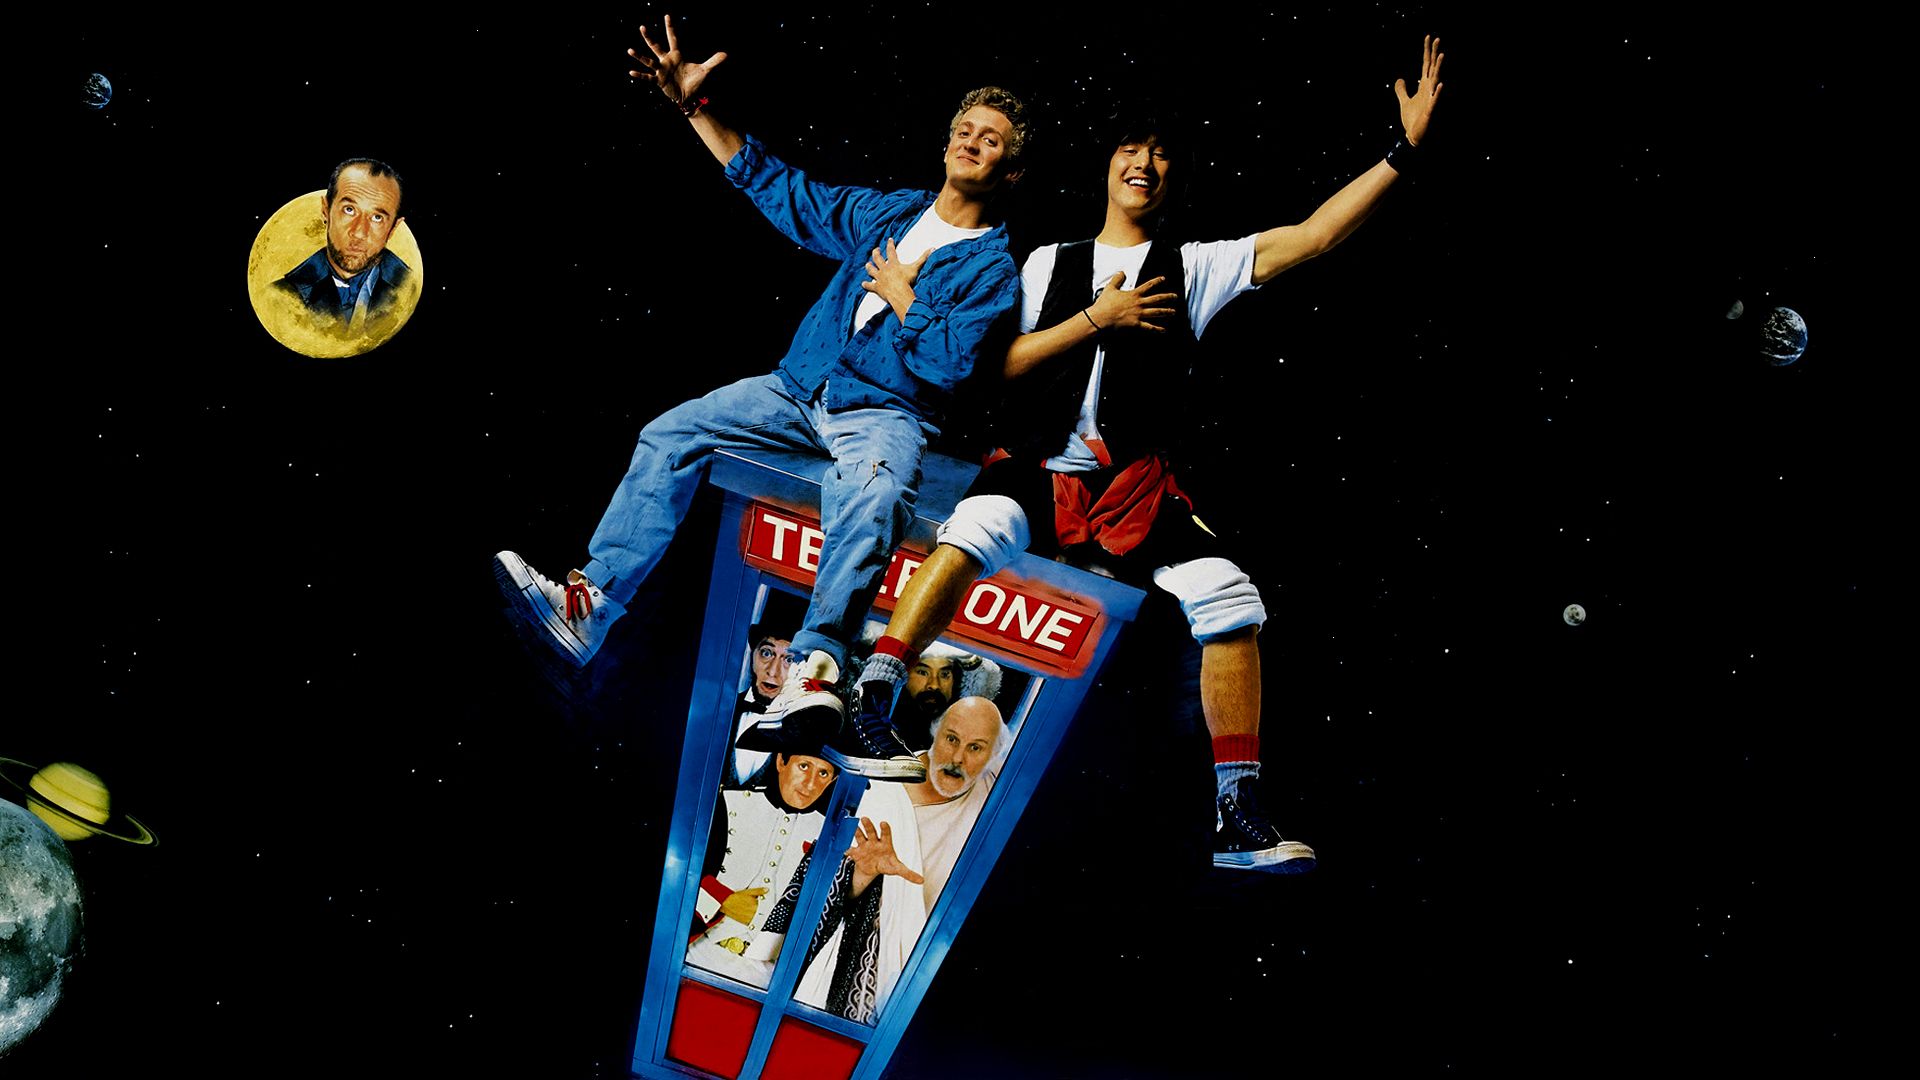 Bill & Ted's Excellent Adventure background